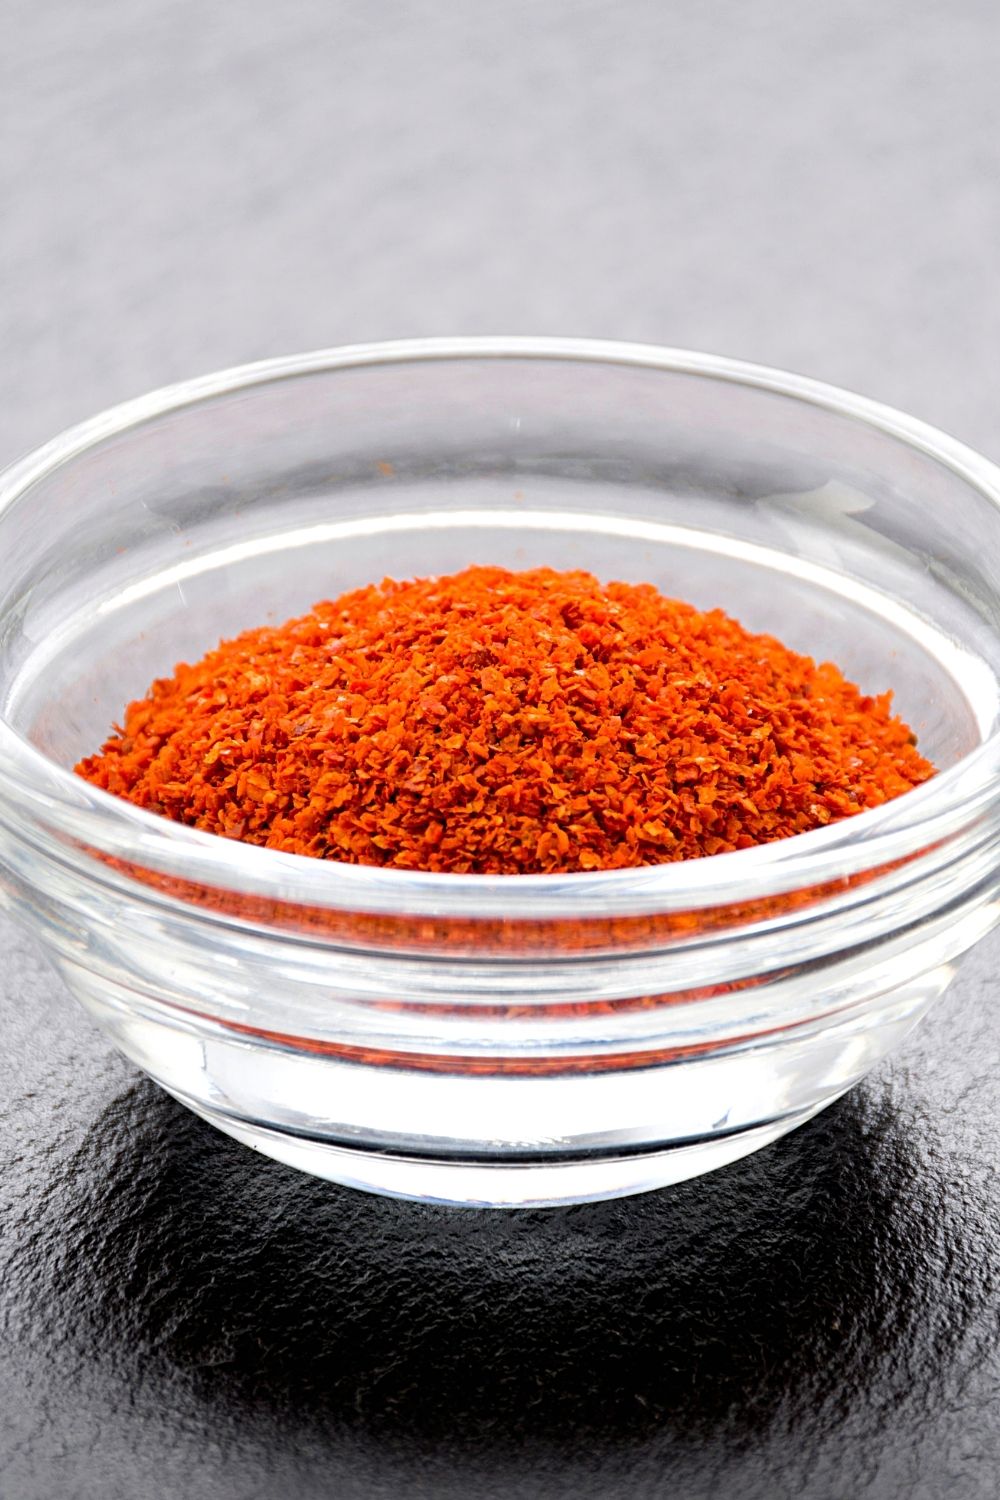 You can sprinkle cayenne pepper powder around the base of your plants to stop cats from eating them